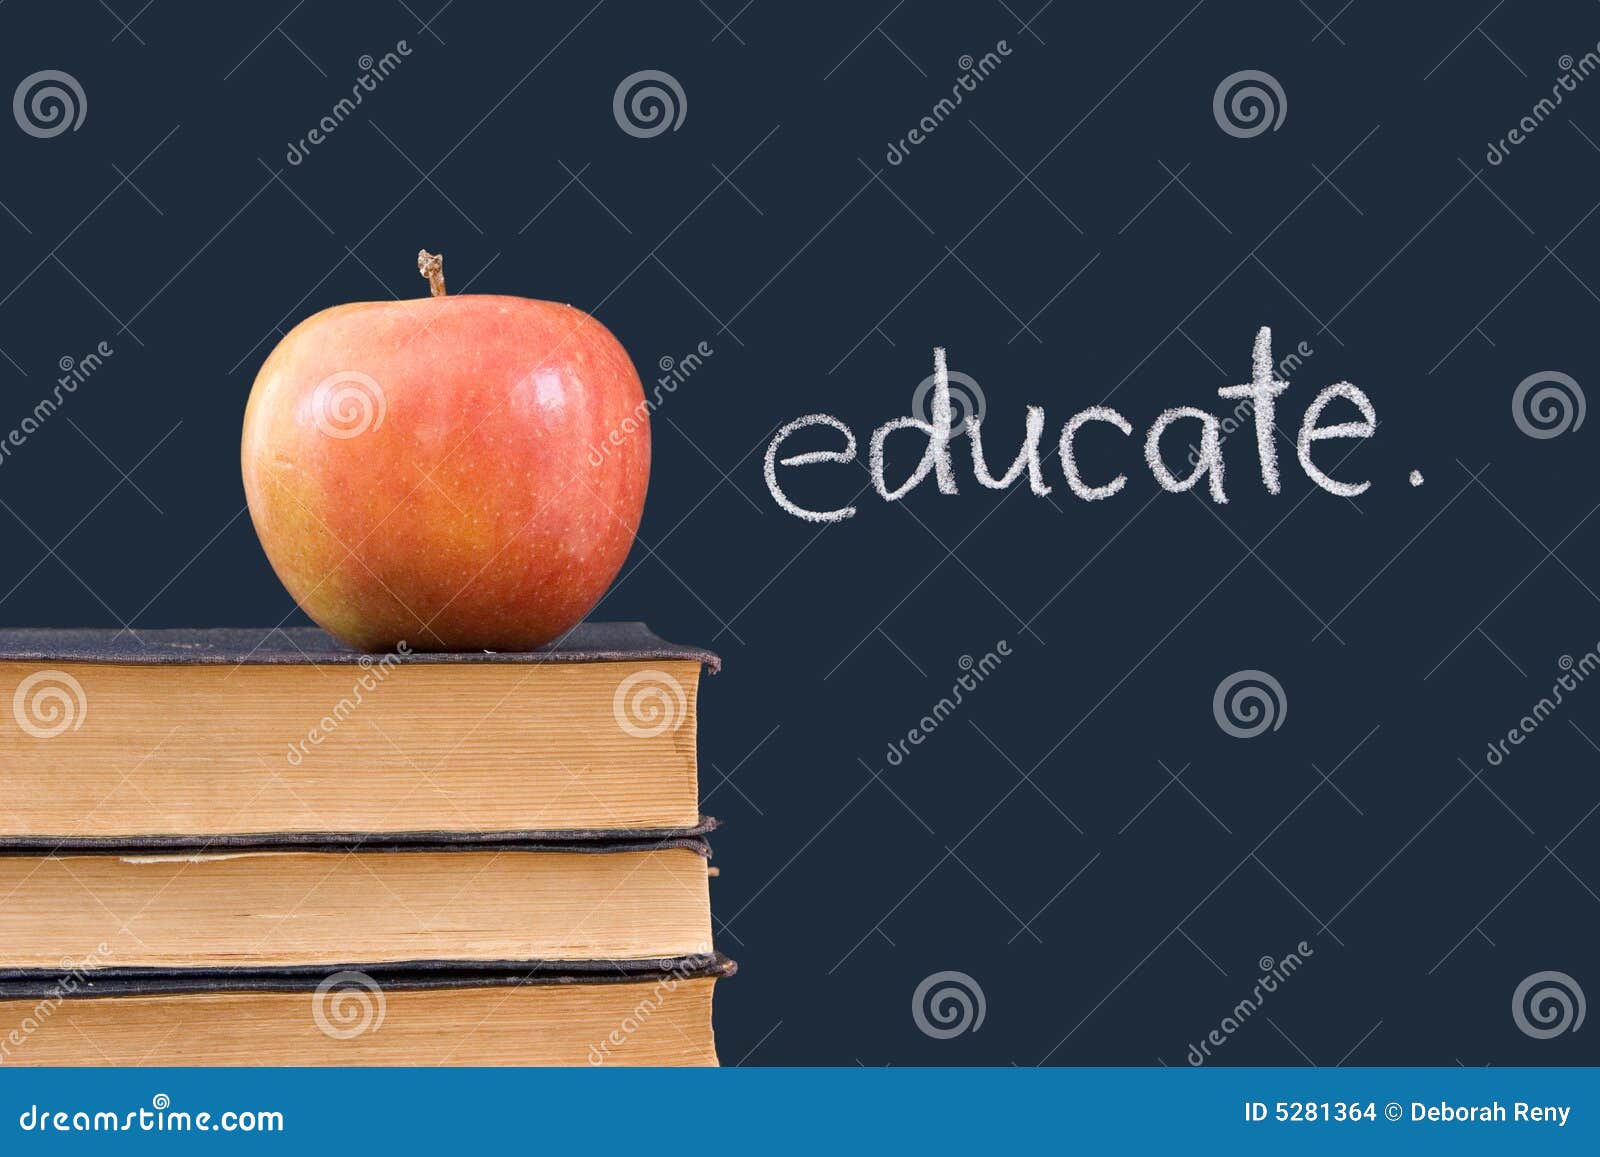 educate on chalkboard with apple & books